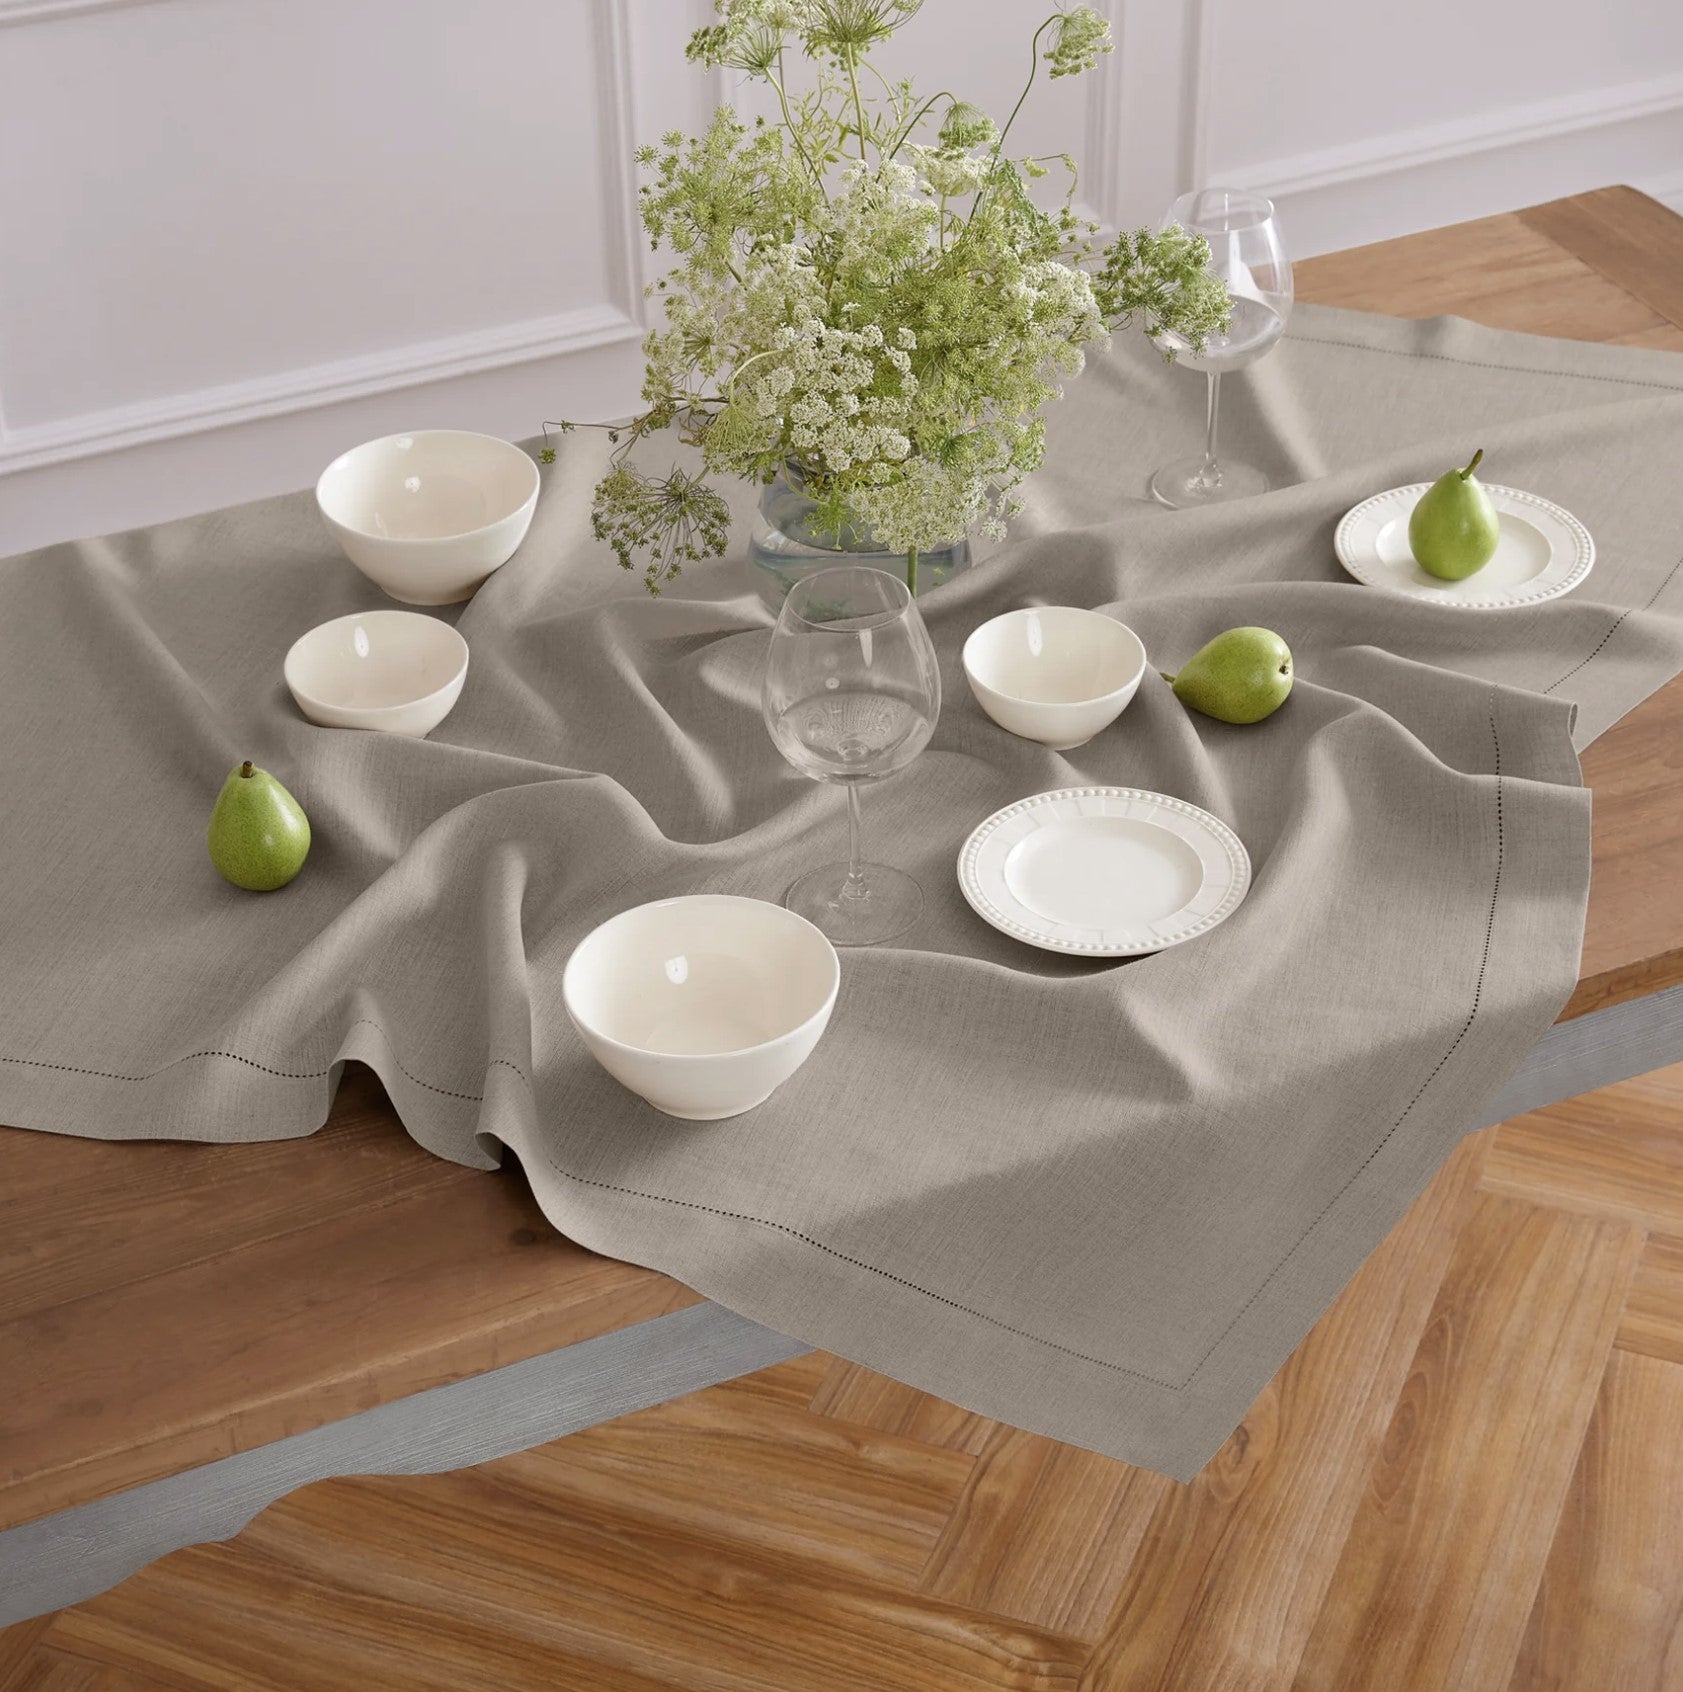 Hemstitched Table Linens (Natural Color)